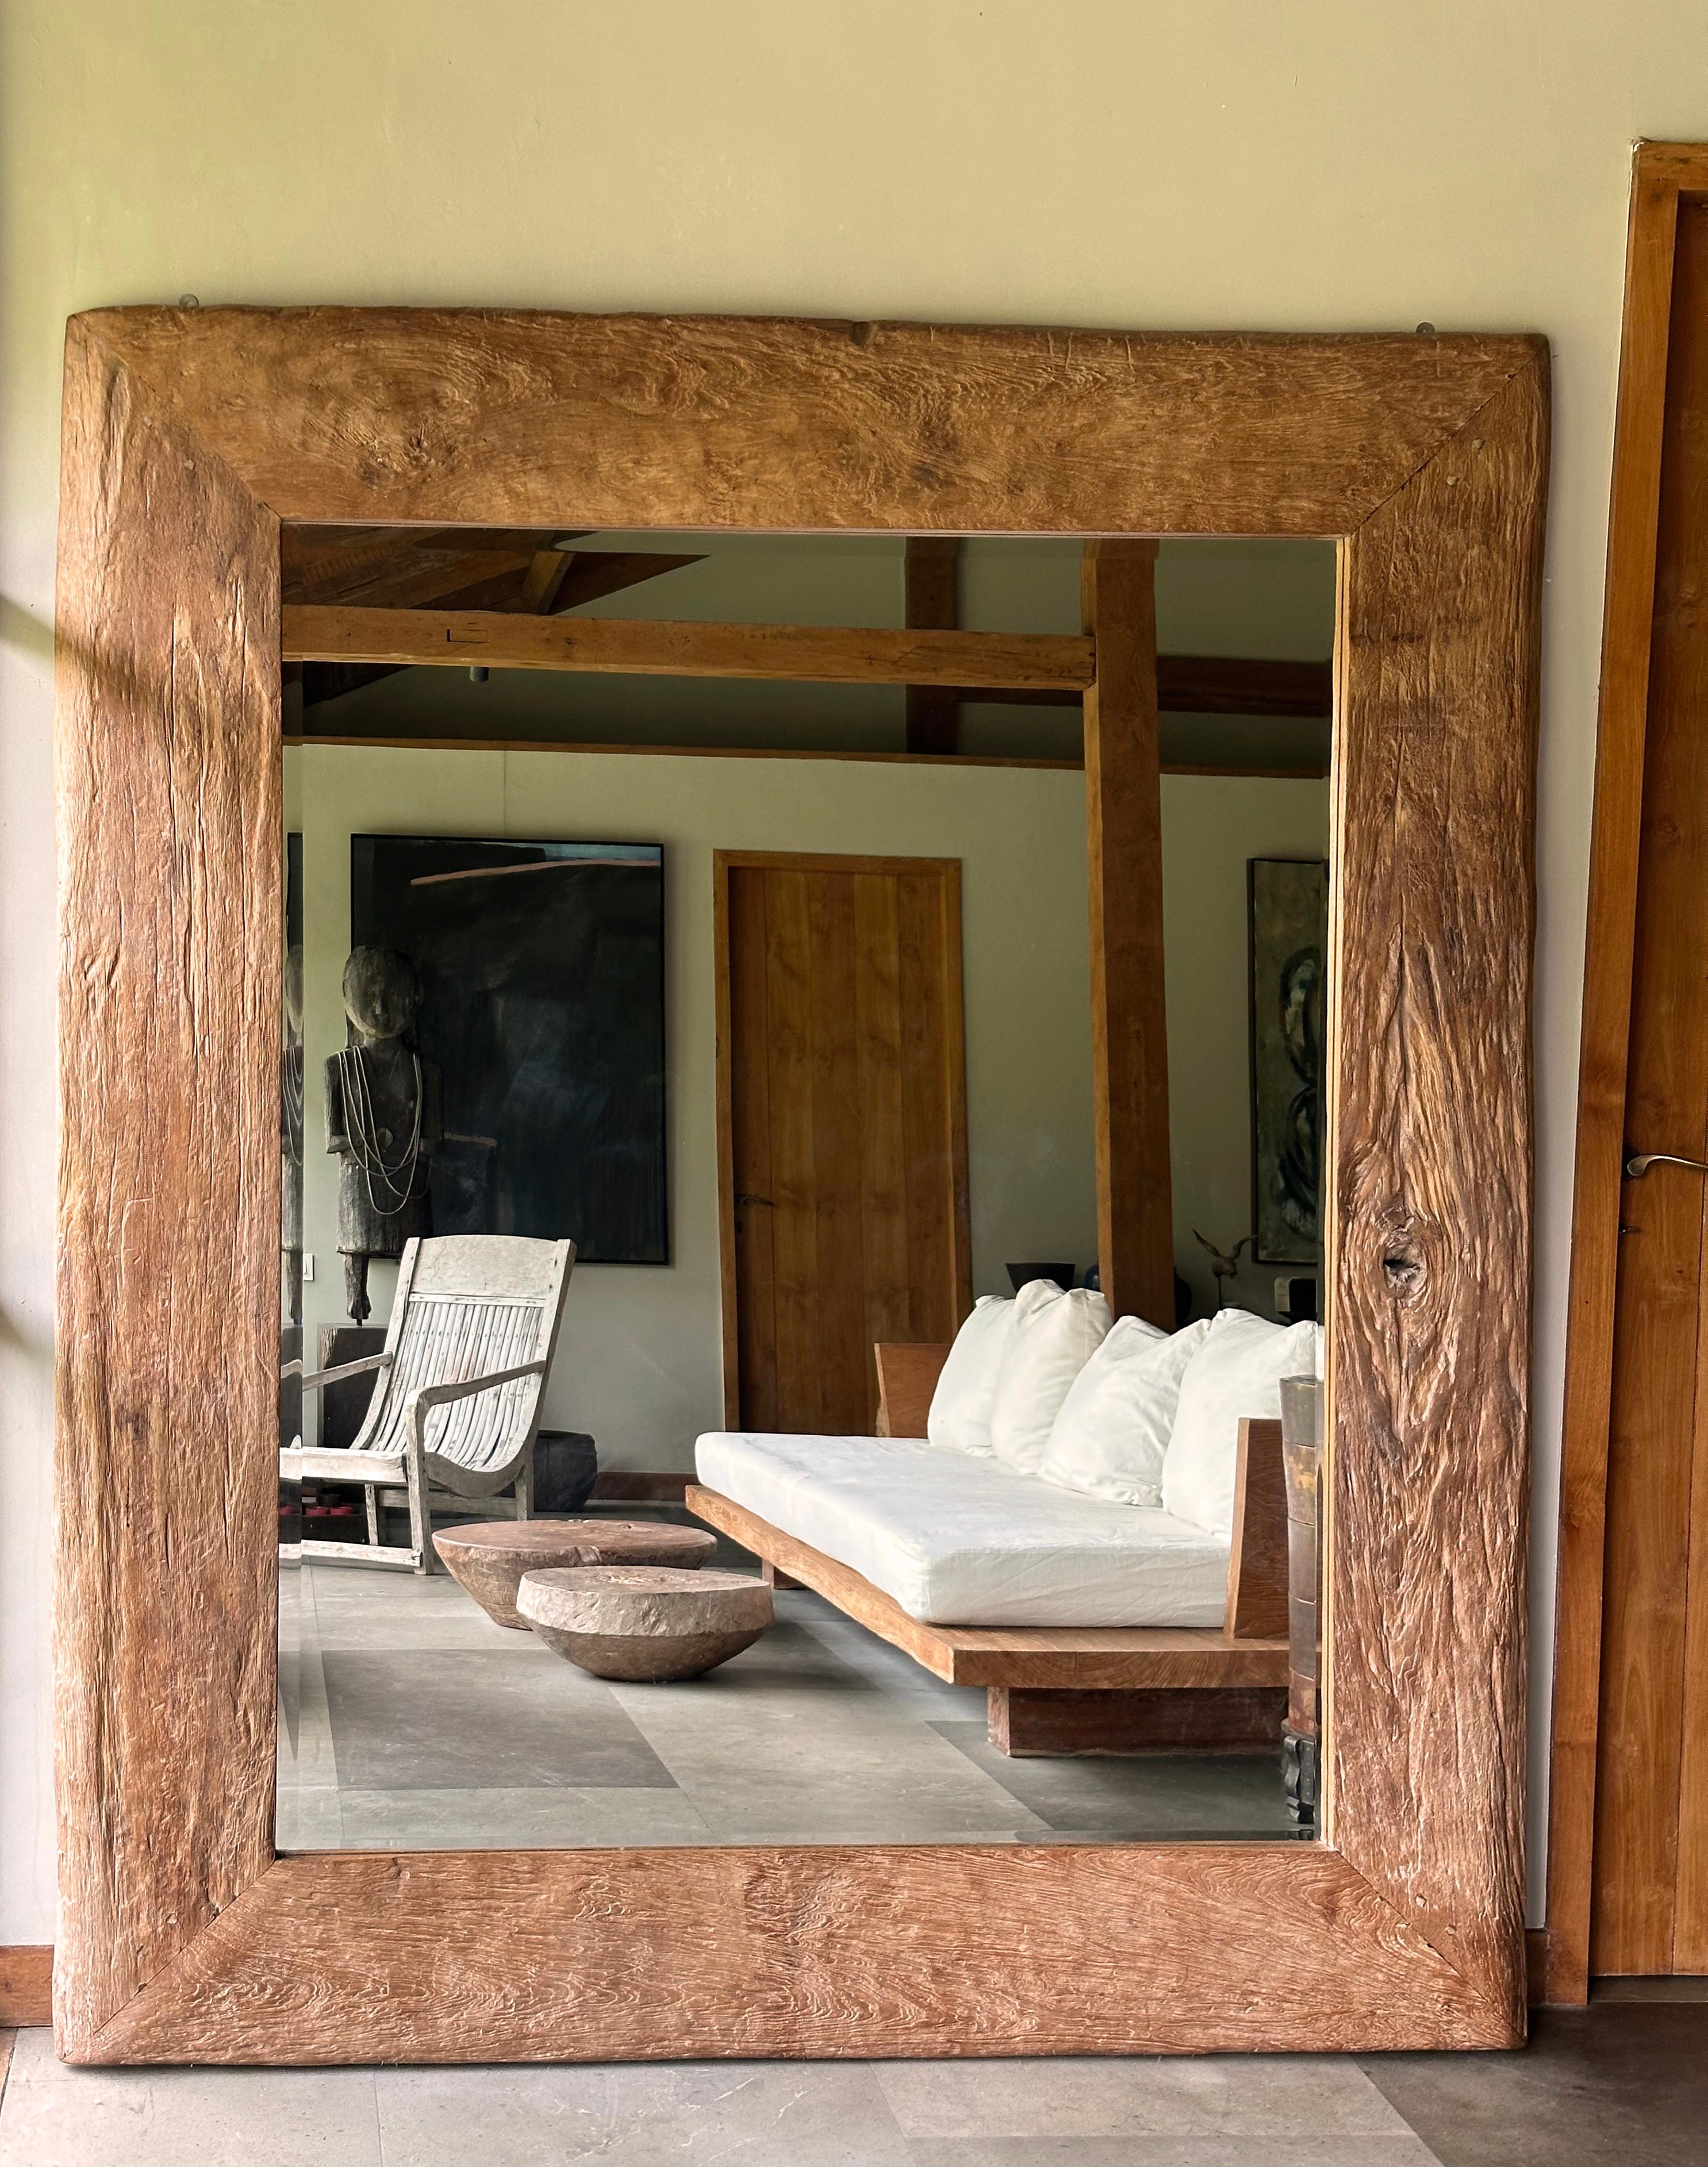 A wonderfully organic teak wood framed mirror. The teak frame comprises of teak sourced from the interior forests of Bojonegoro, Java, Indonesia. Bojonegoro is renowned for having exceptional teak. The wood textures and shades add to this mirrors